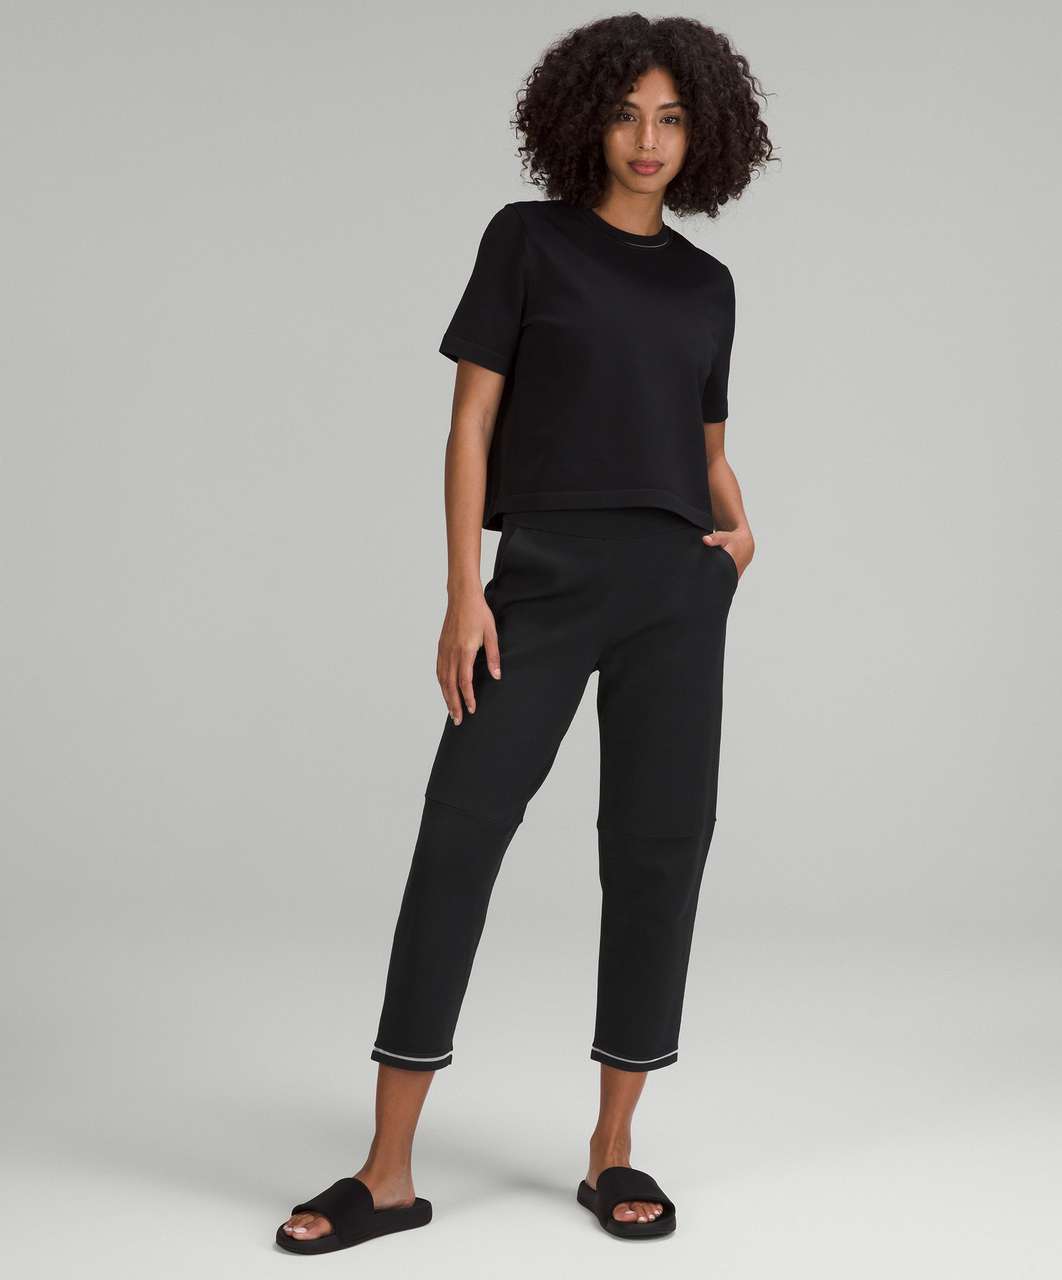 Lululemon Relaxed-Fit High-Rise Knit Cropped Pants 24" - Black